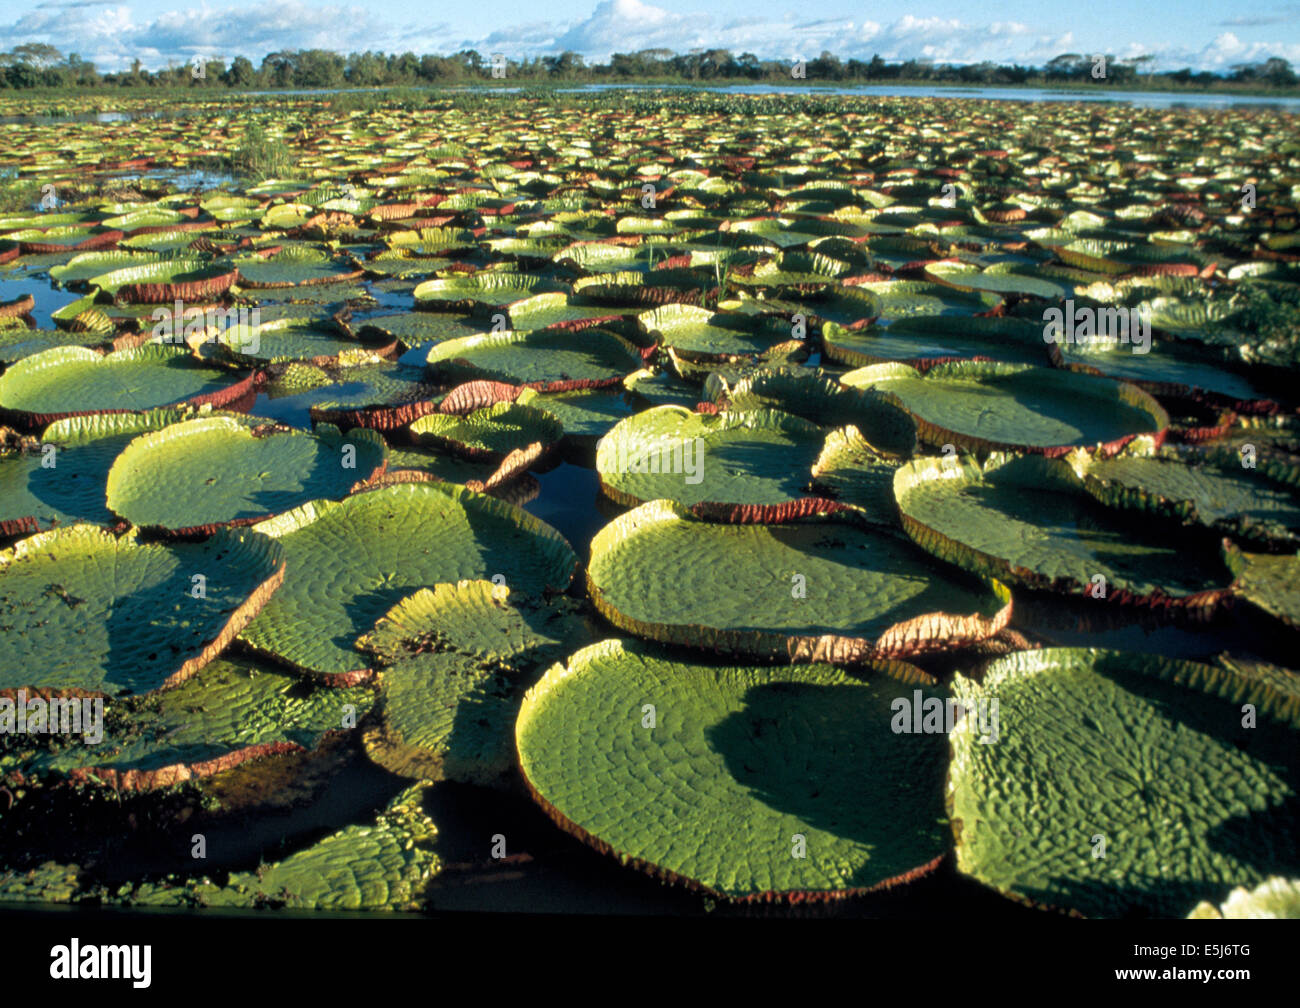 Wild Victoria amazonica giant water lilies in an oxbow lake in the Amazon basin Stock Photo